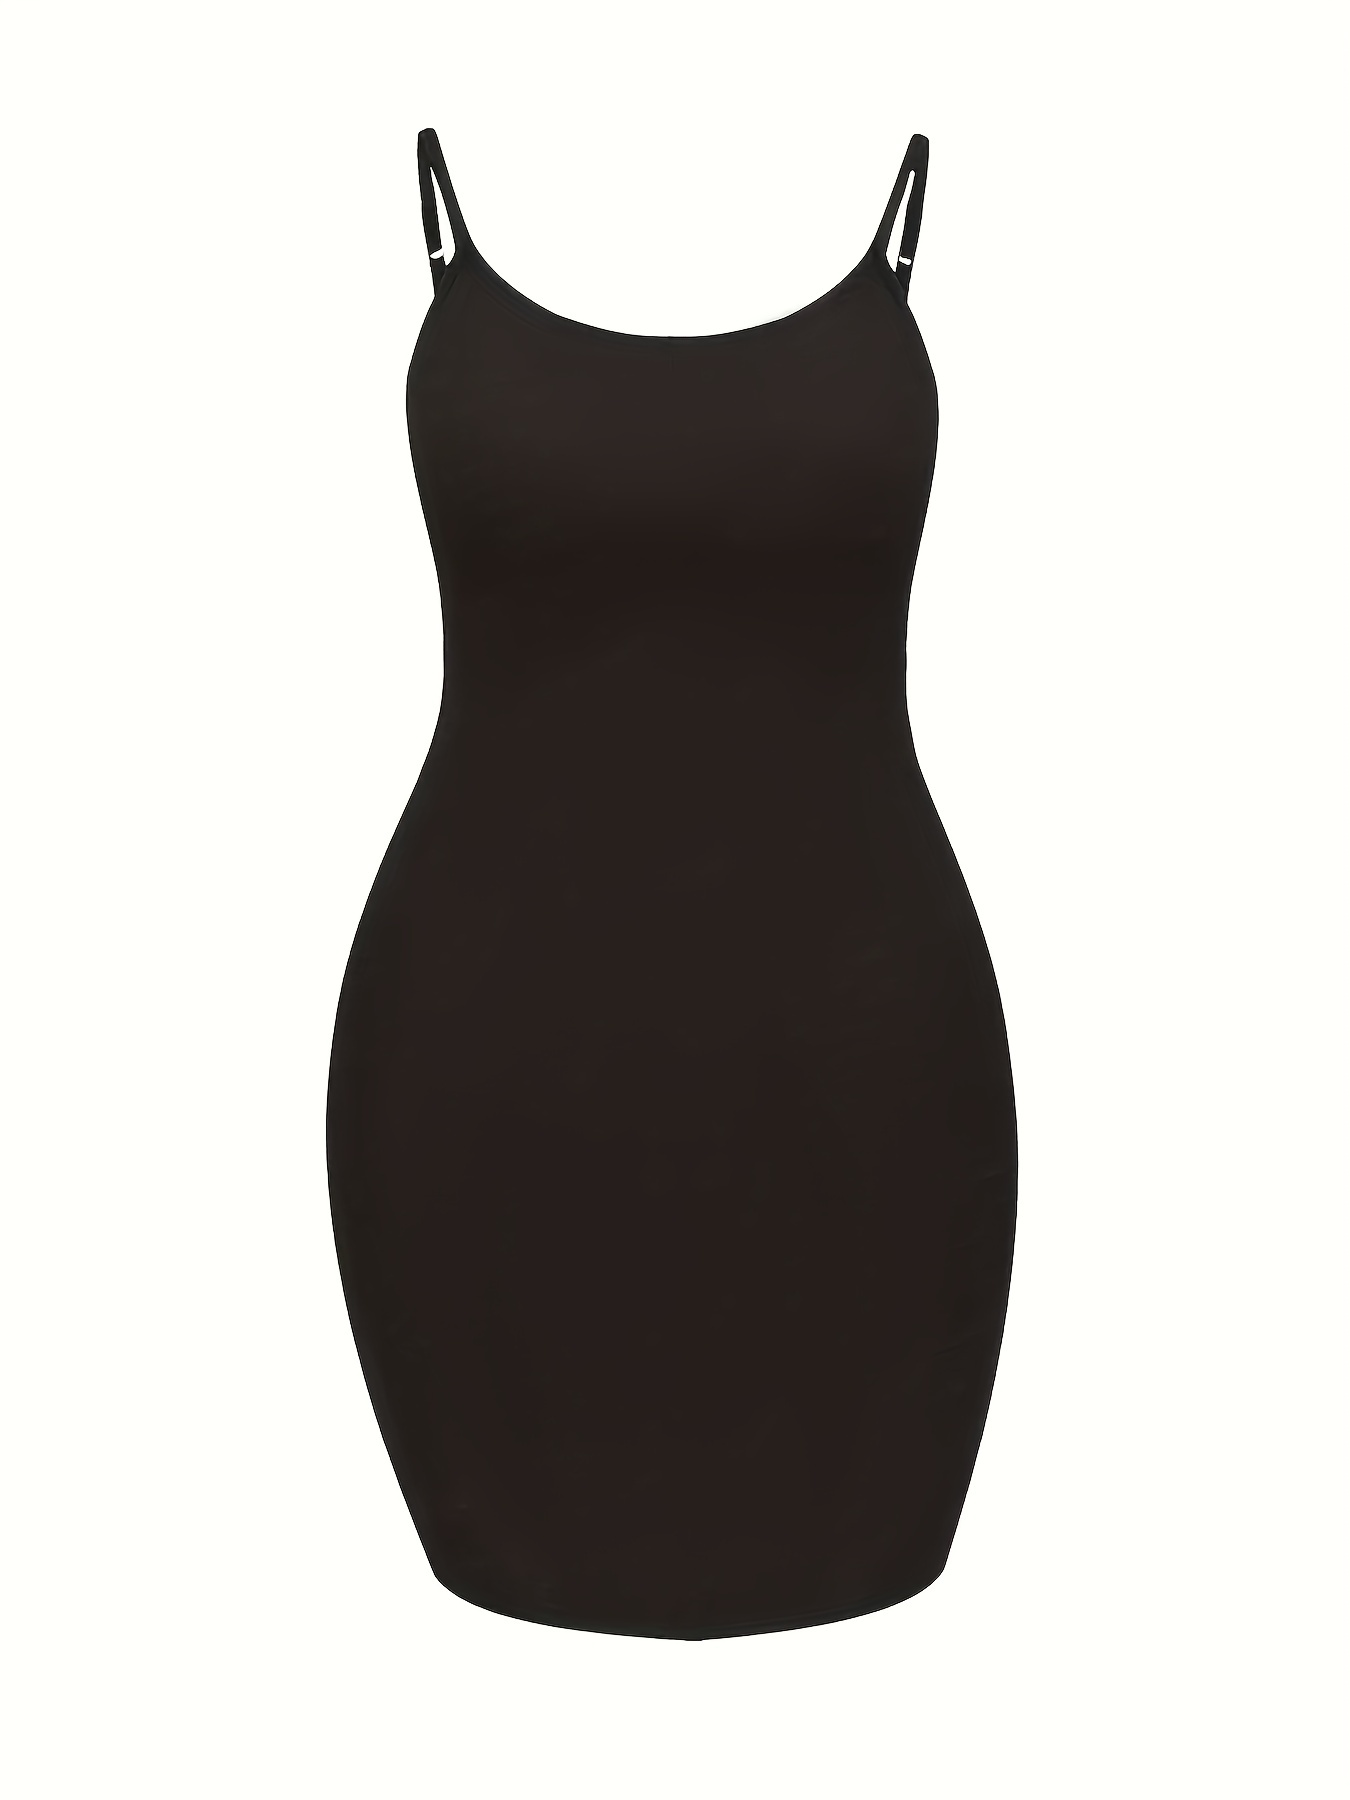 Curve Dresses Top Rated, Curve Dresses Top Rated for sale New Zealand